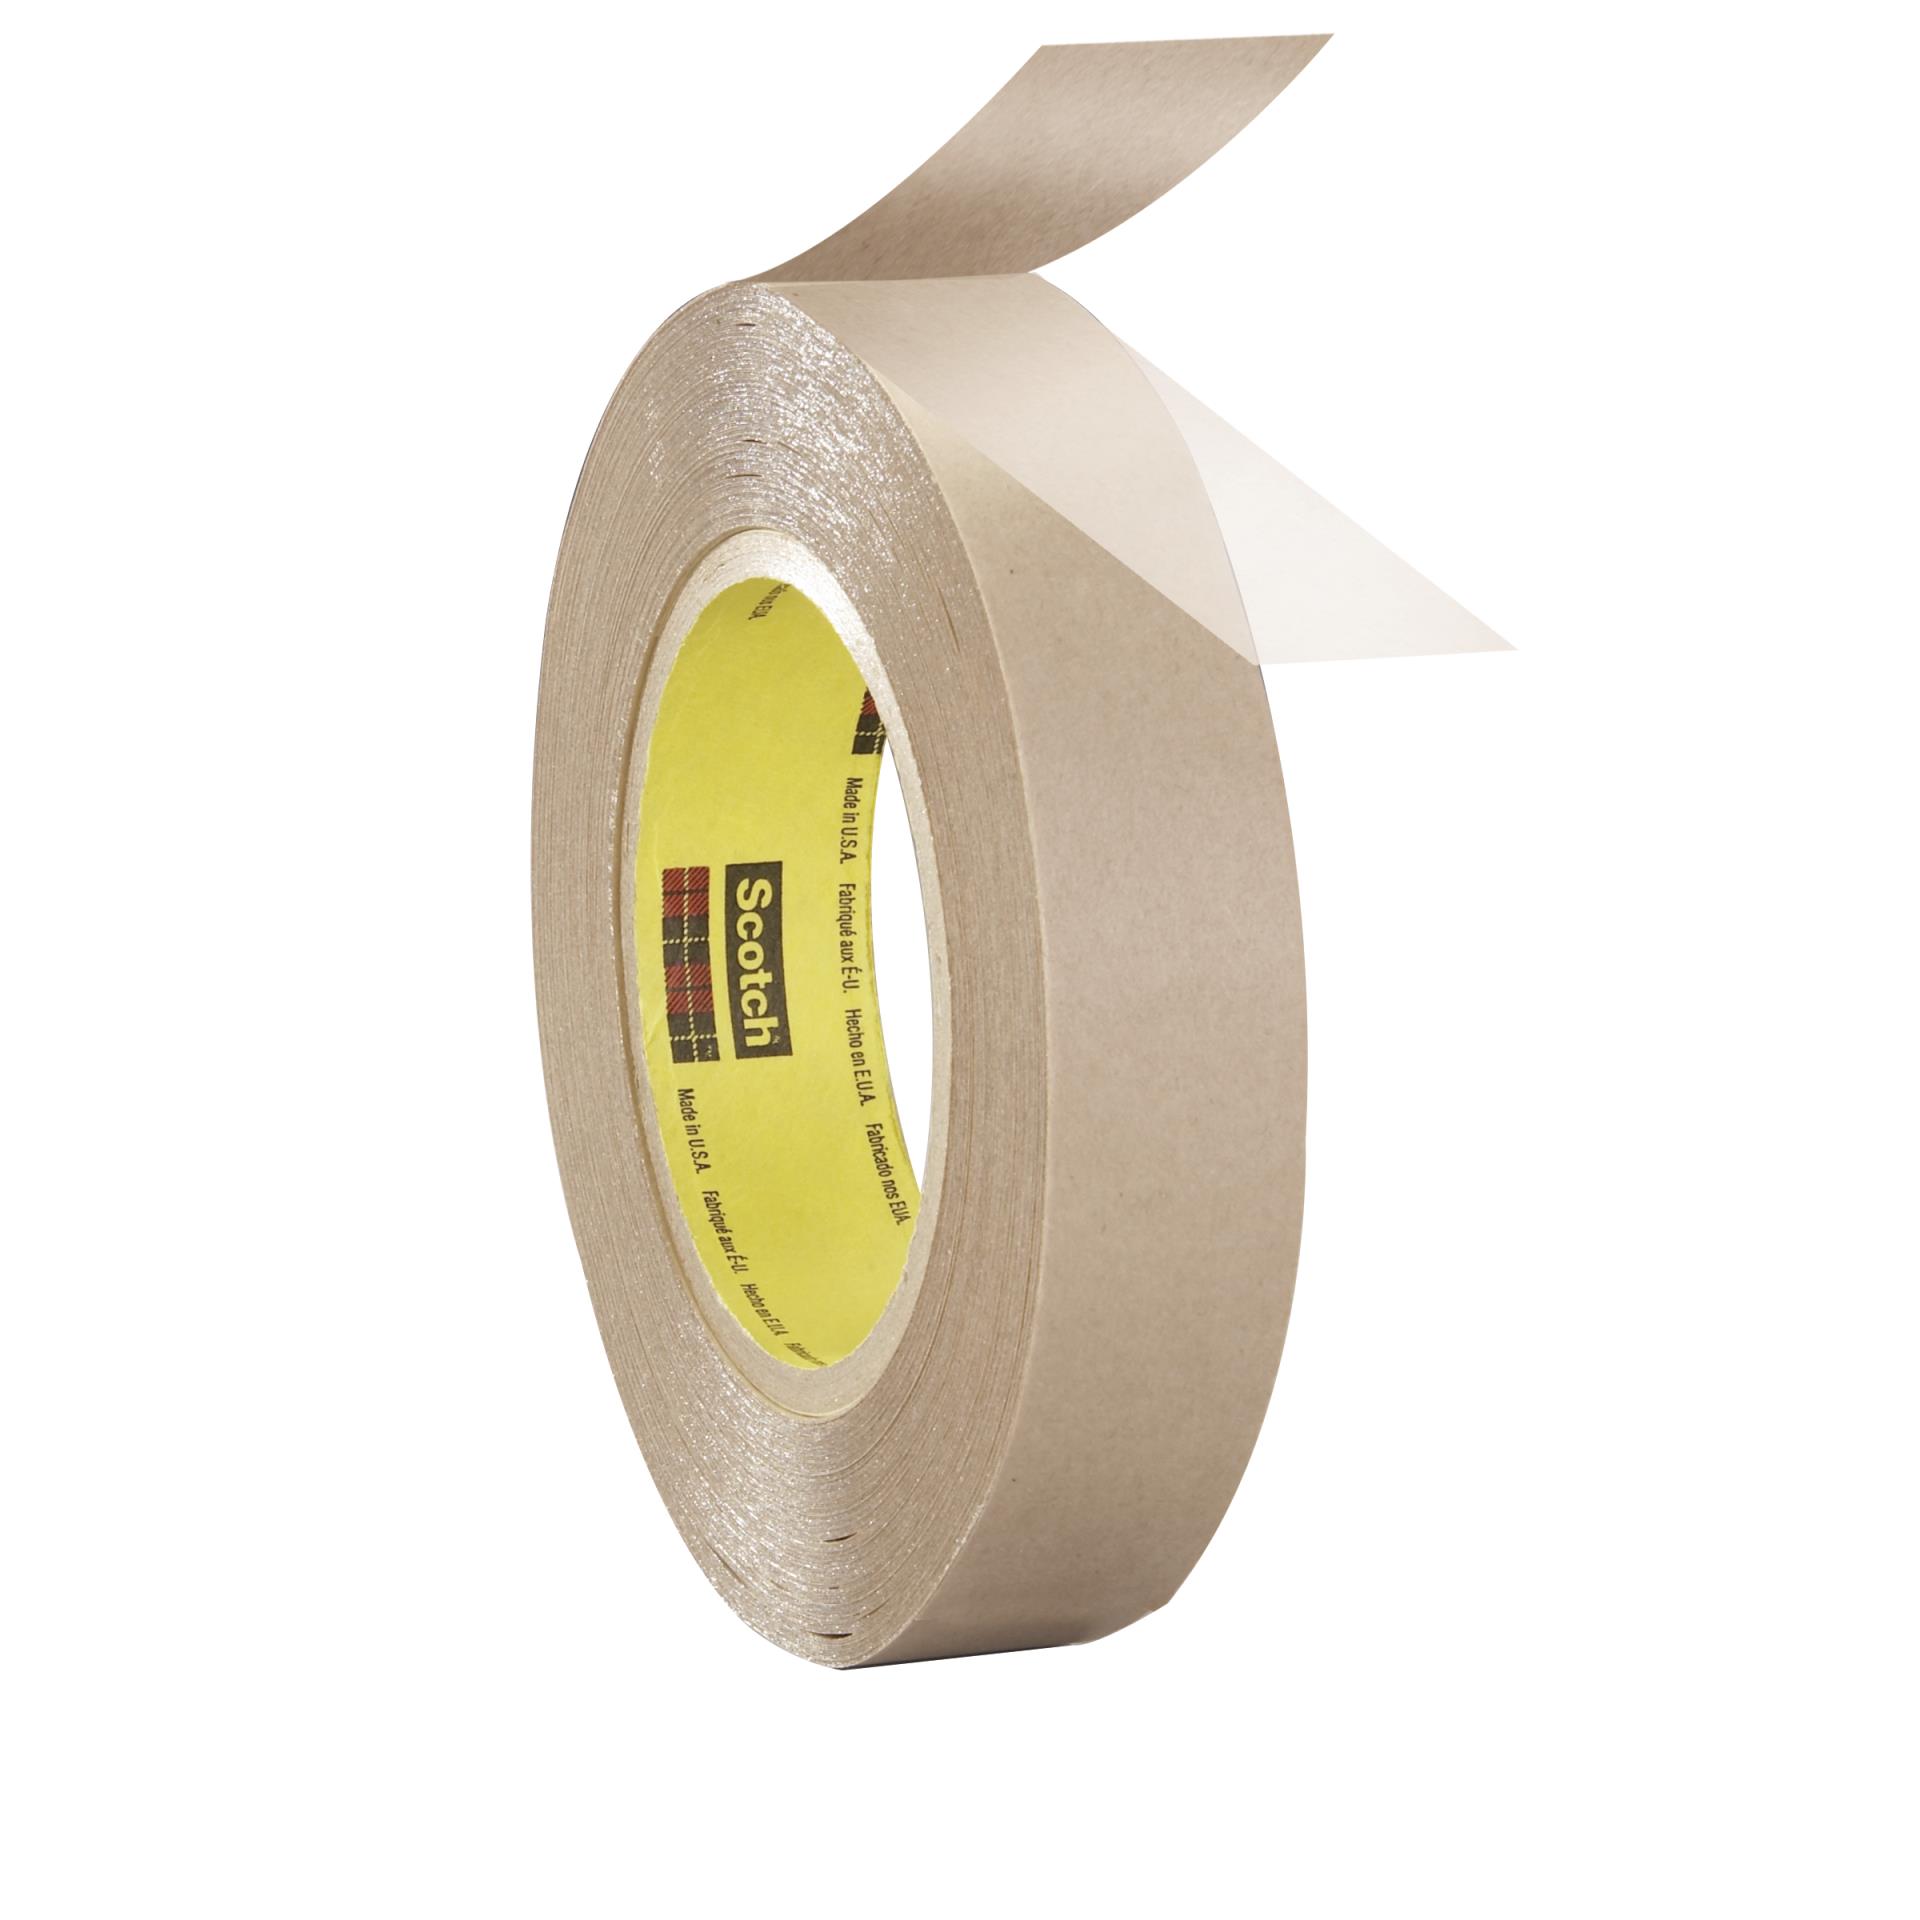 Scotch Removable POSTER TAPE - 1 Roll - .75 x 150